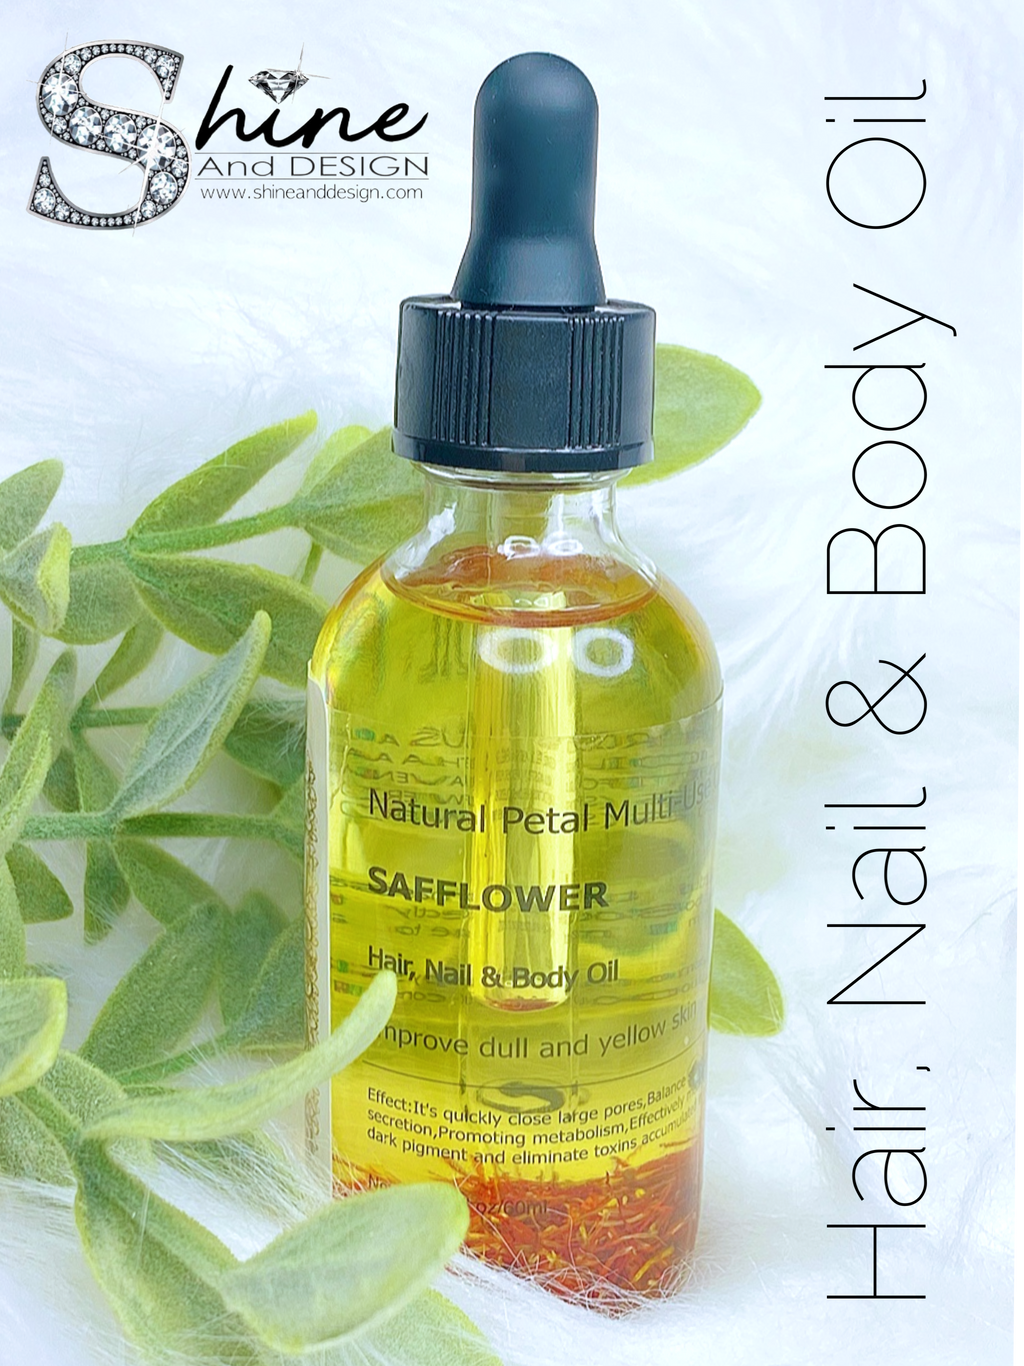 SHINE - SAFFLOWER- Hair, Nail & Body Oil- w/Vitamin E & Essential Extracts